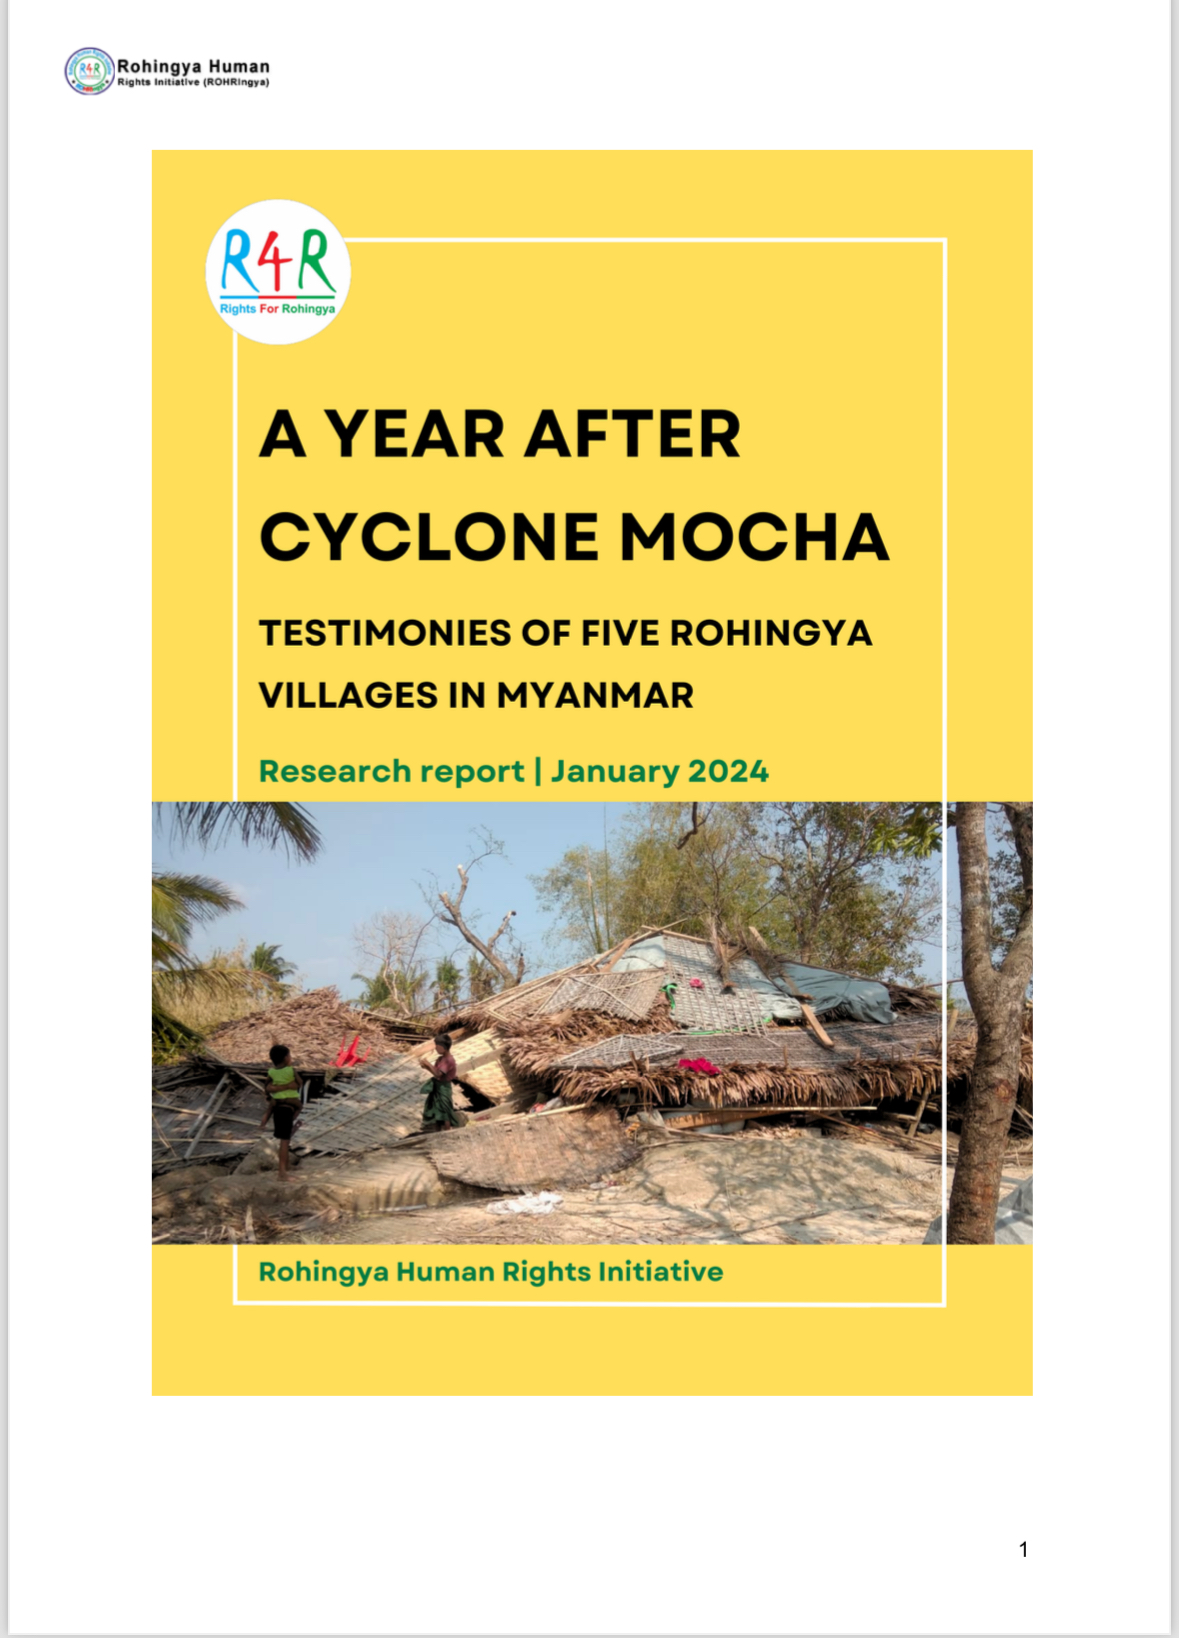 A YEAR AFTER MOCHA:  TESTIMONIES OF FIVE ROHINGYA VILLAGES IN MYANMAR